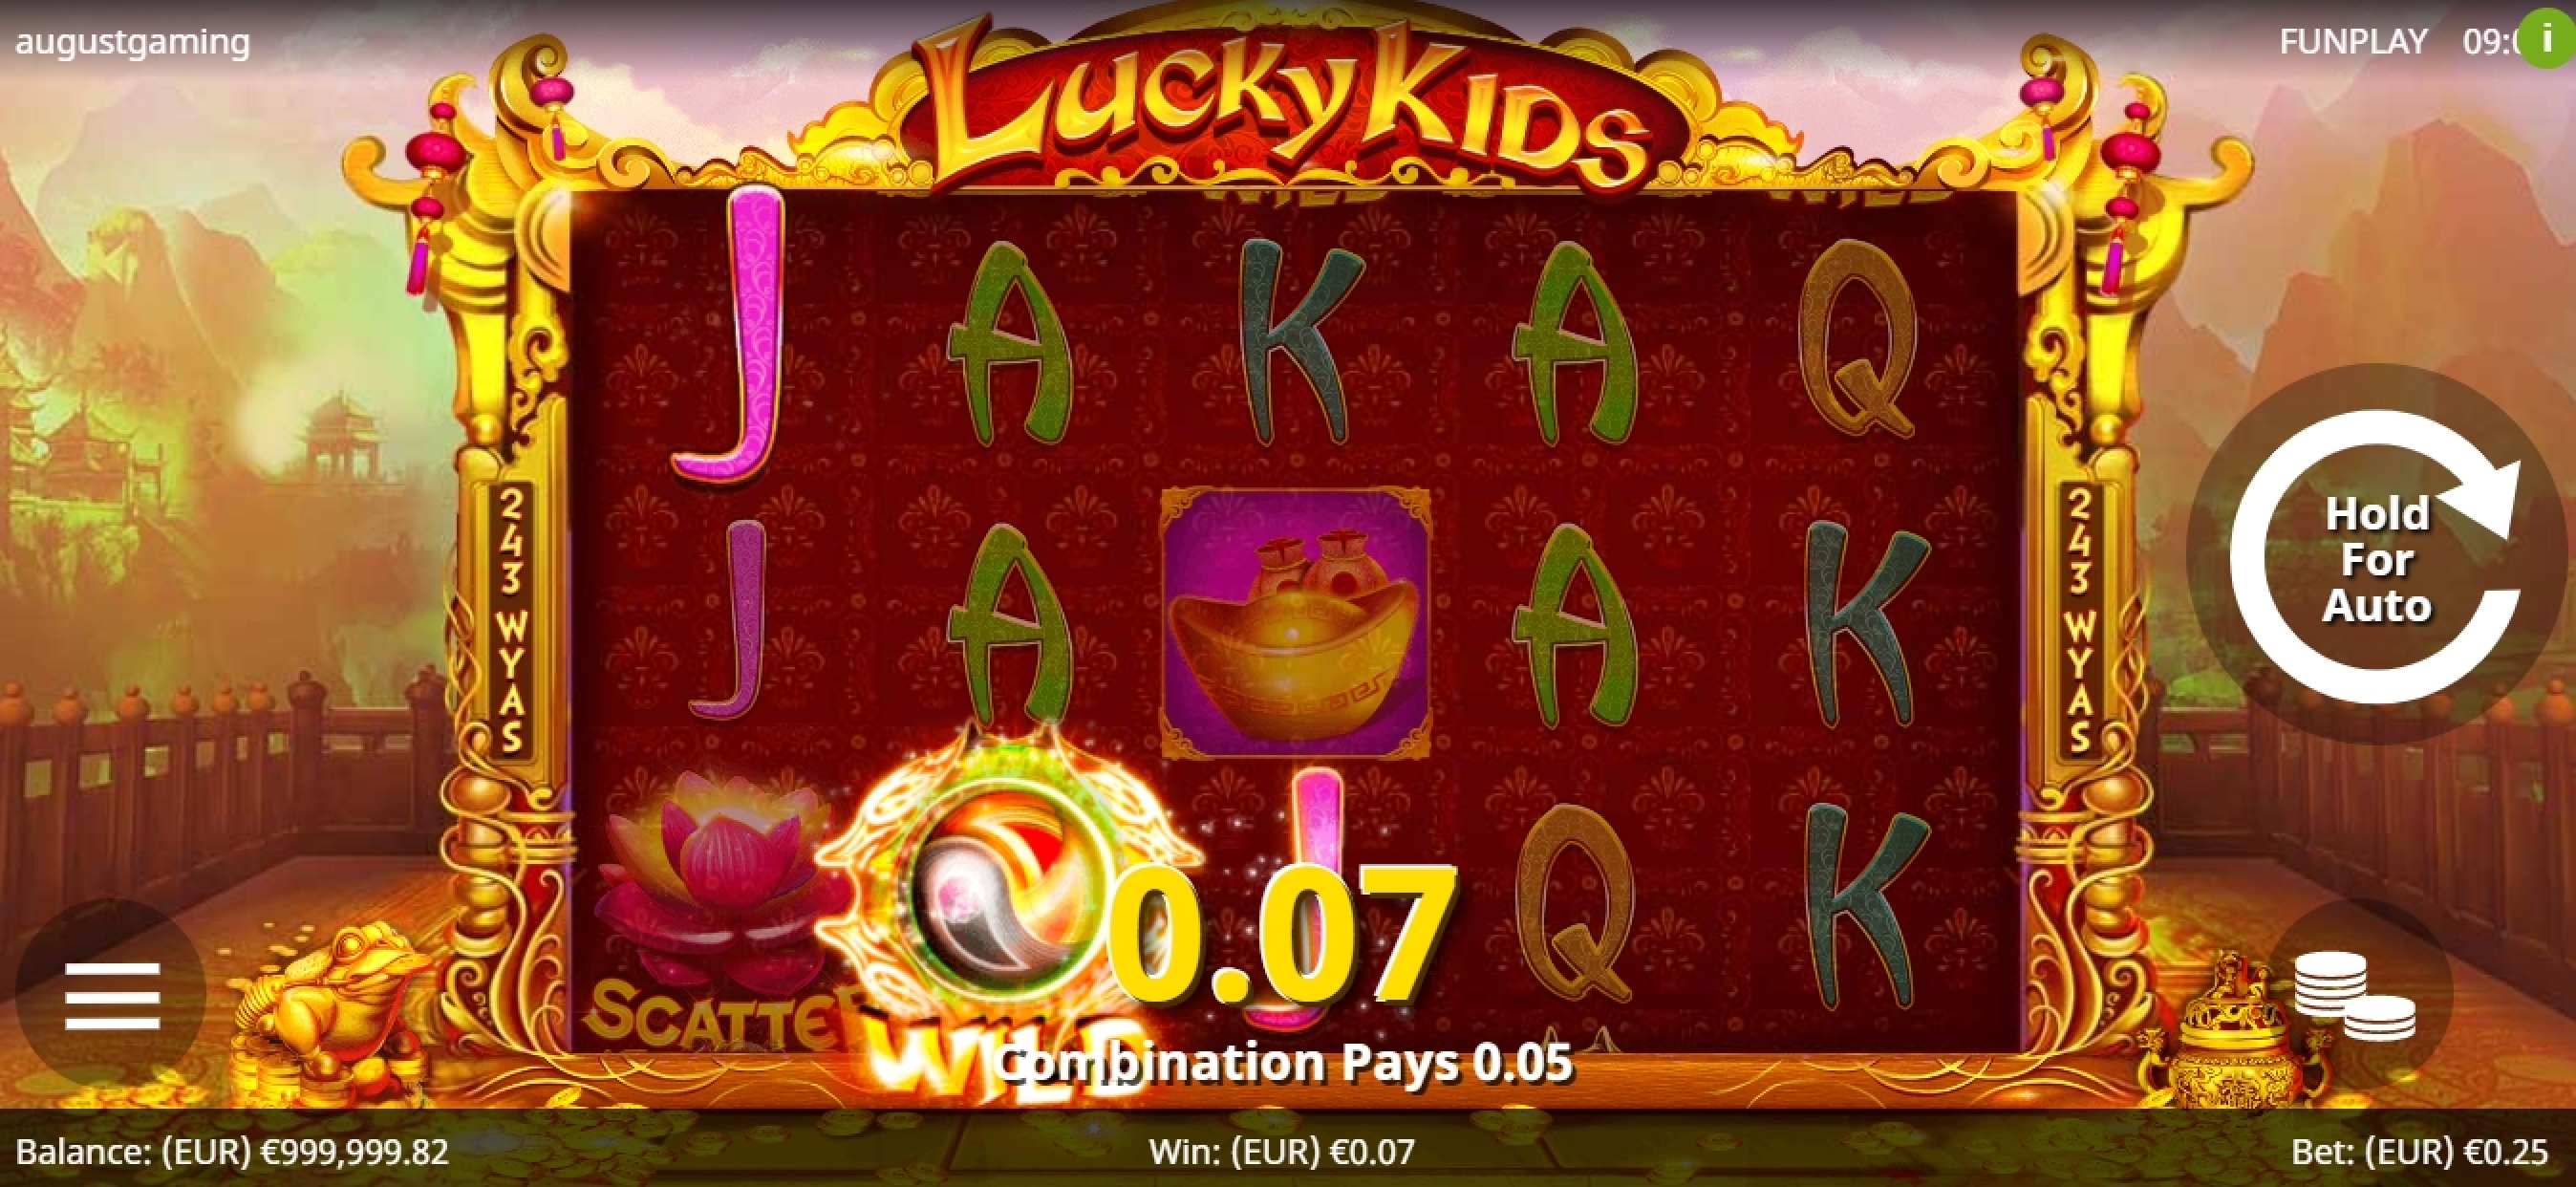 Win Money in Lucky Kids Free Slot Game by August Gaming